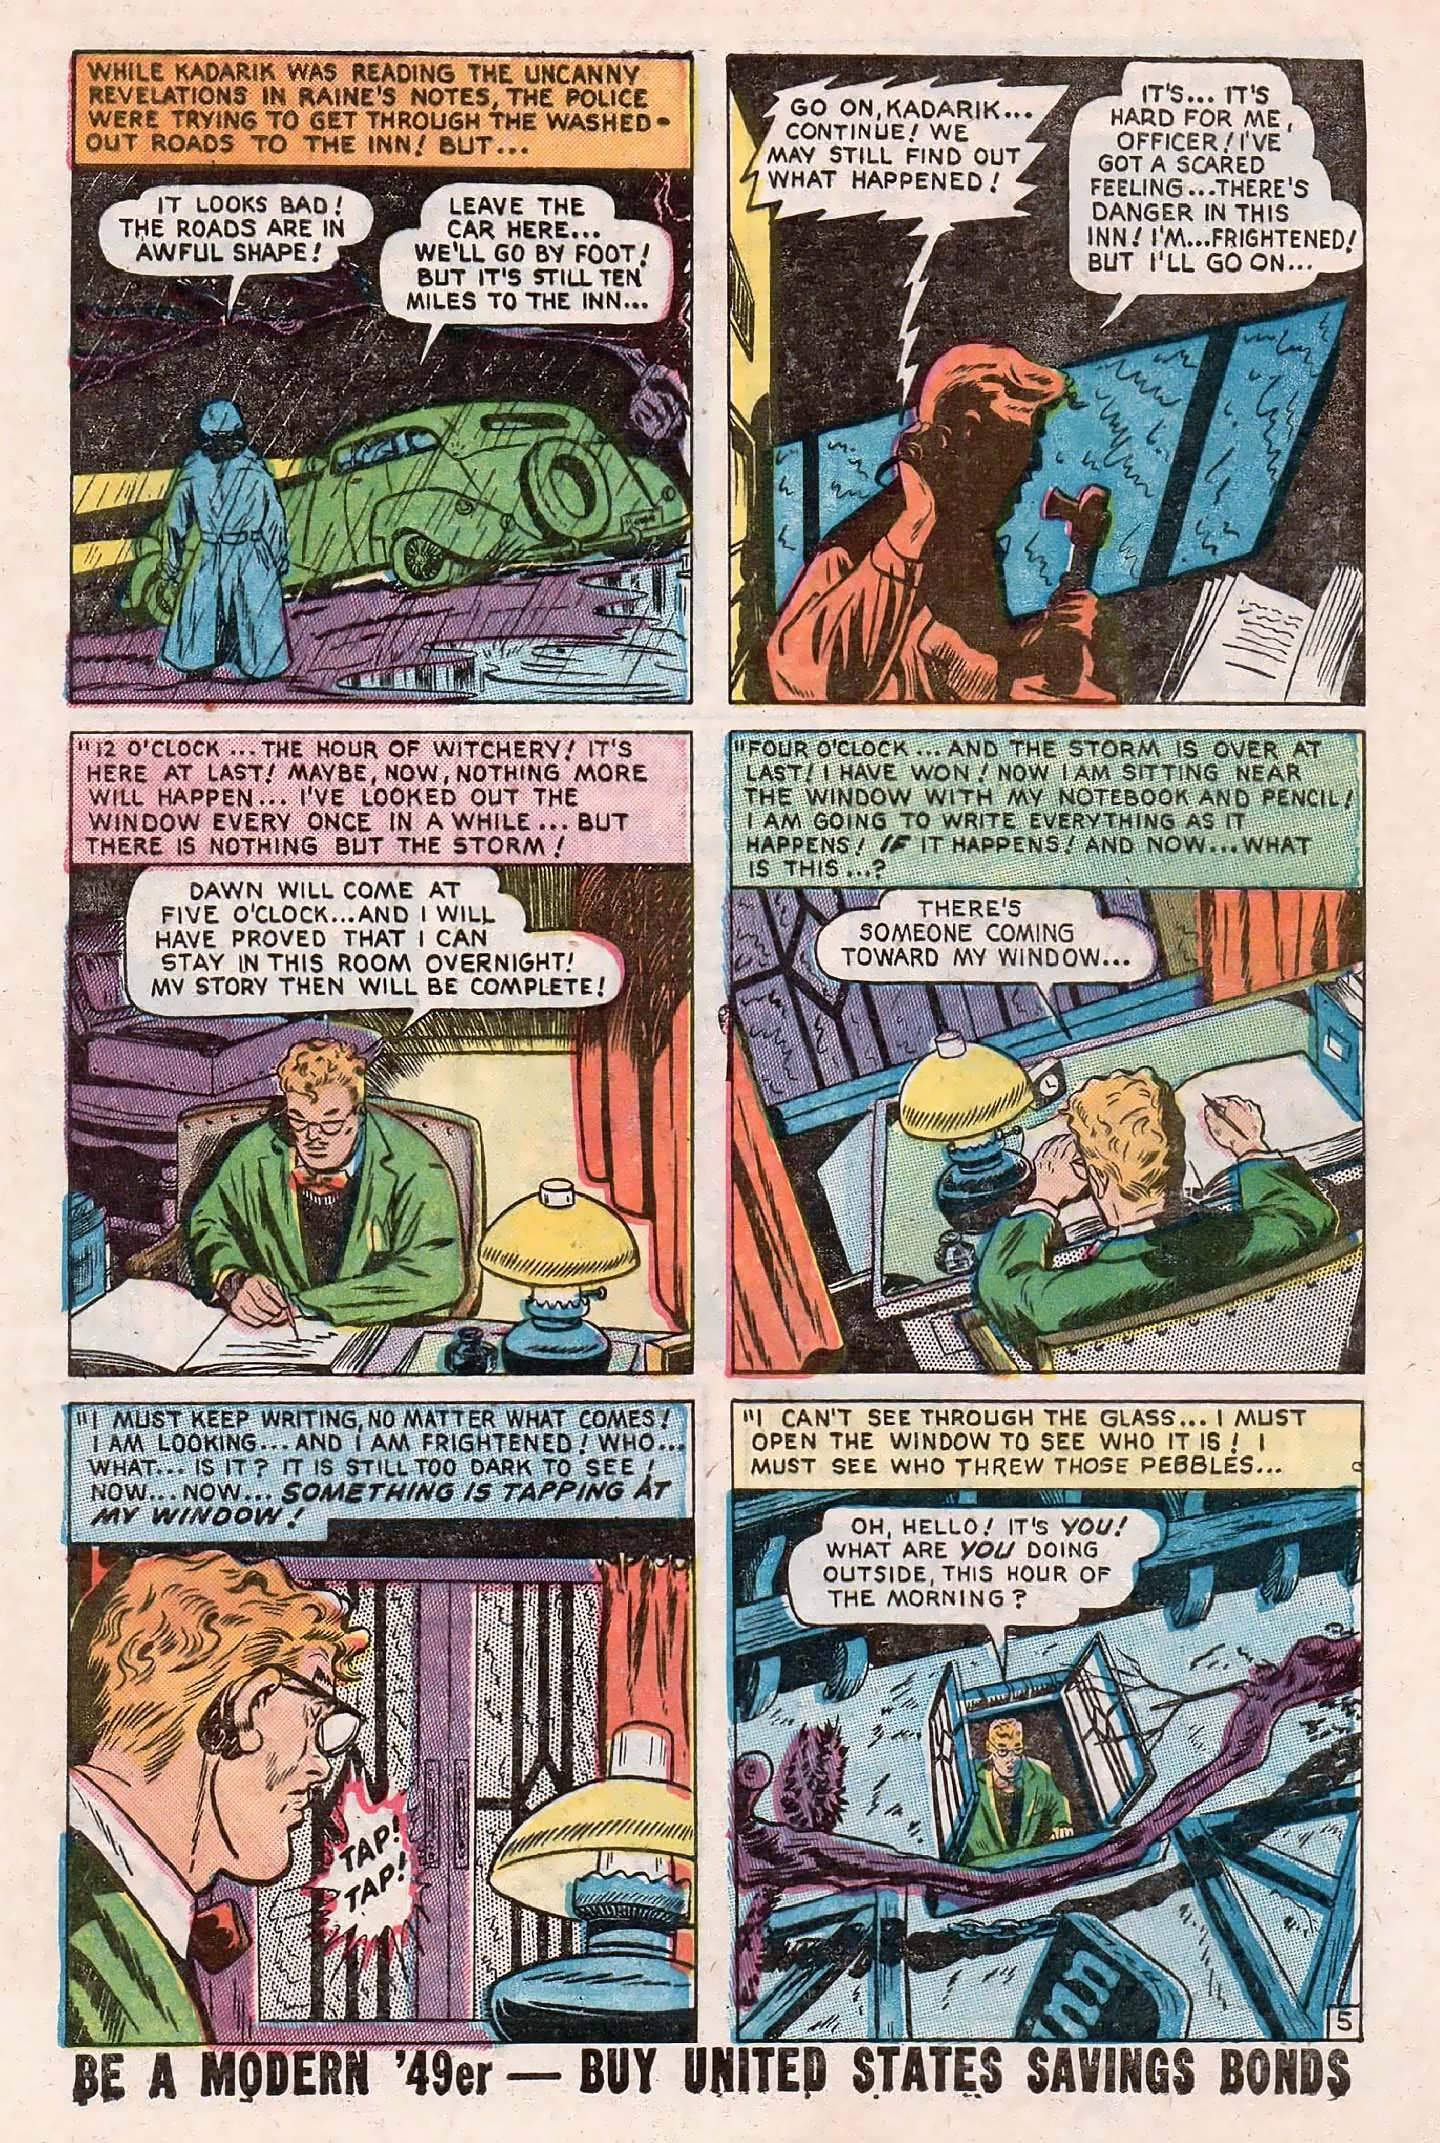 Marvel Tales (1949) 93 Page 6